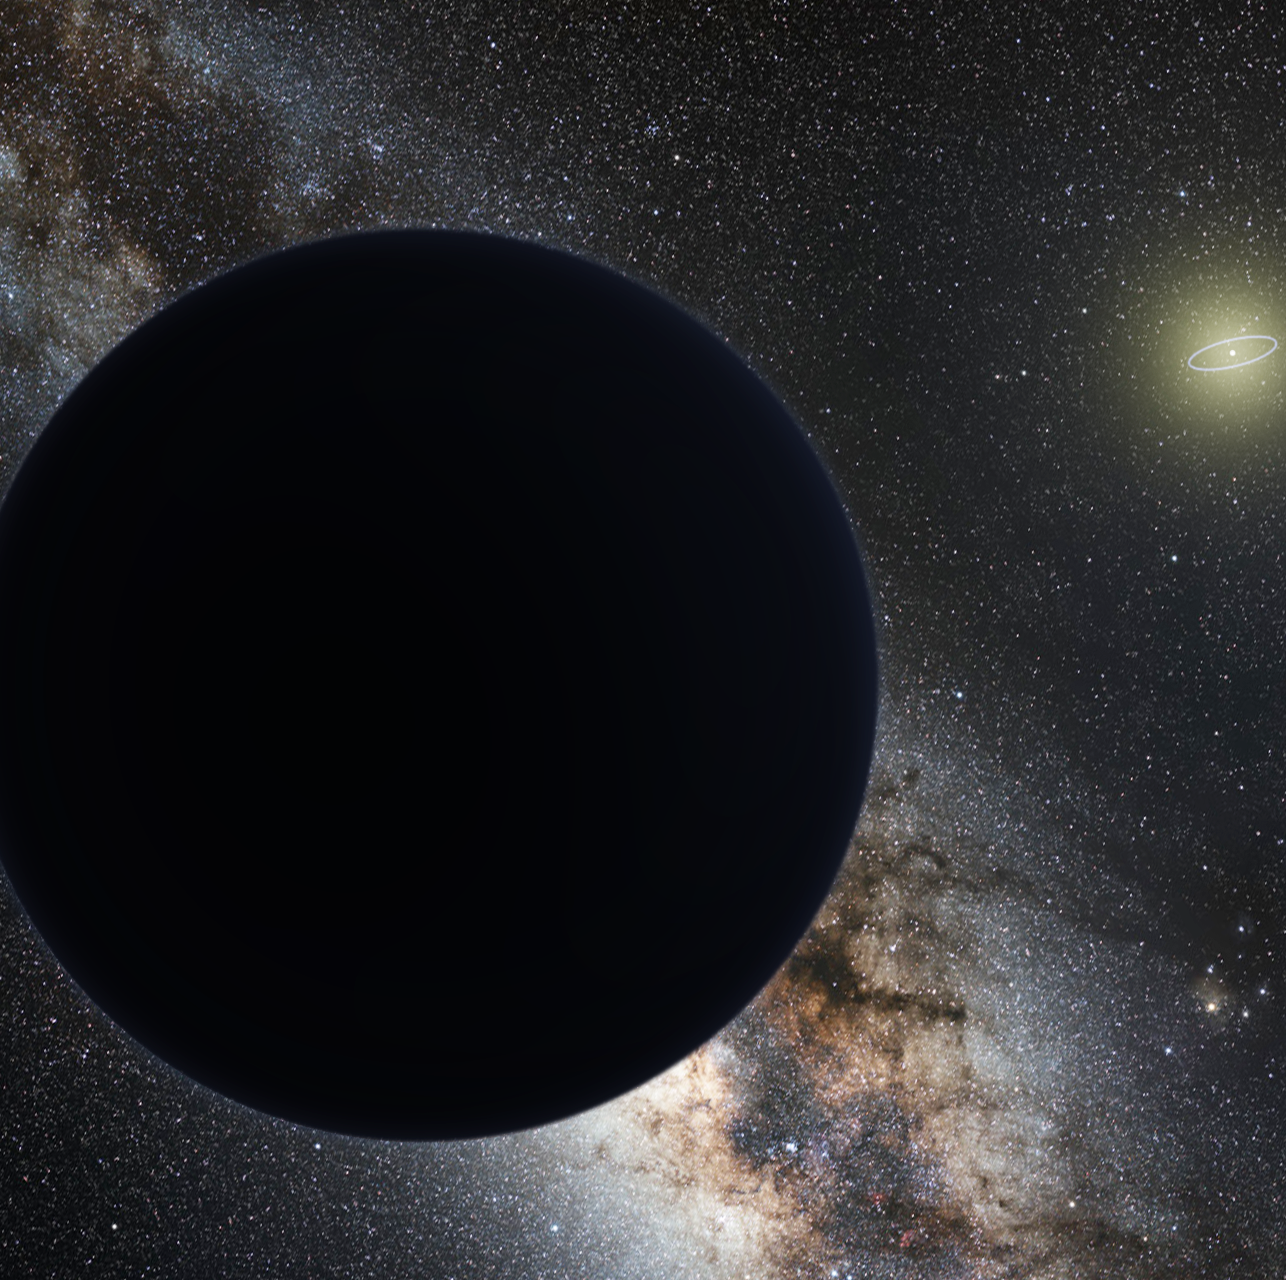 Scientists Think They May Be Able to Find the Missing Planet Nine